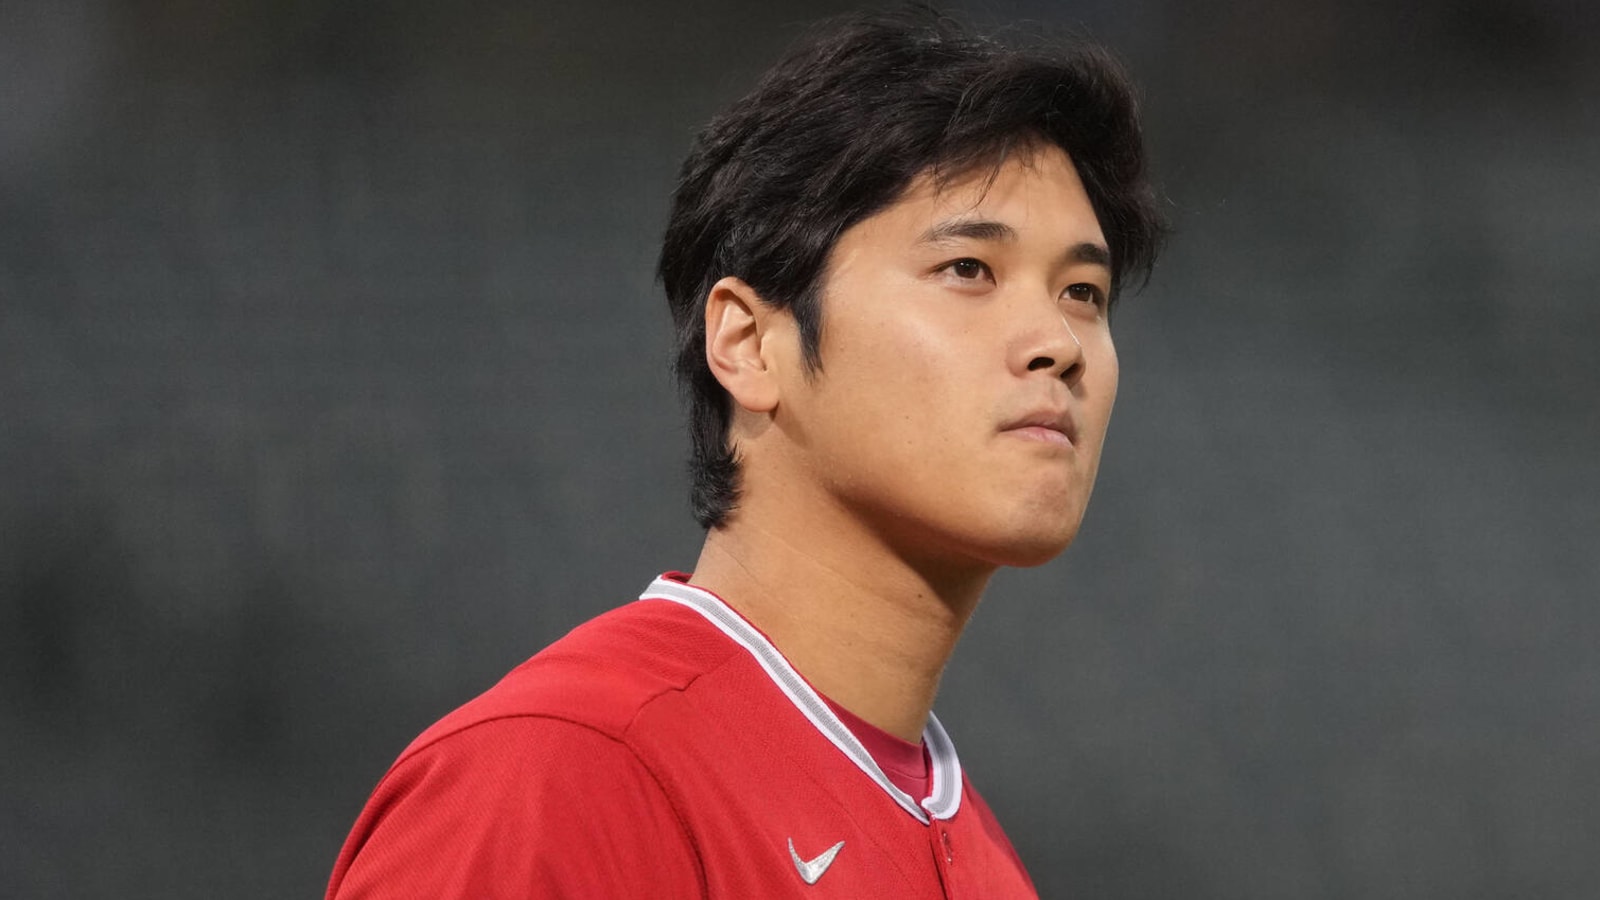 Shohei Ohtani shares cool moment with Czech electrician